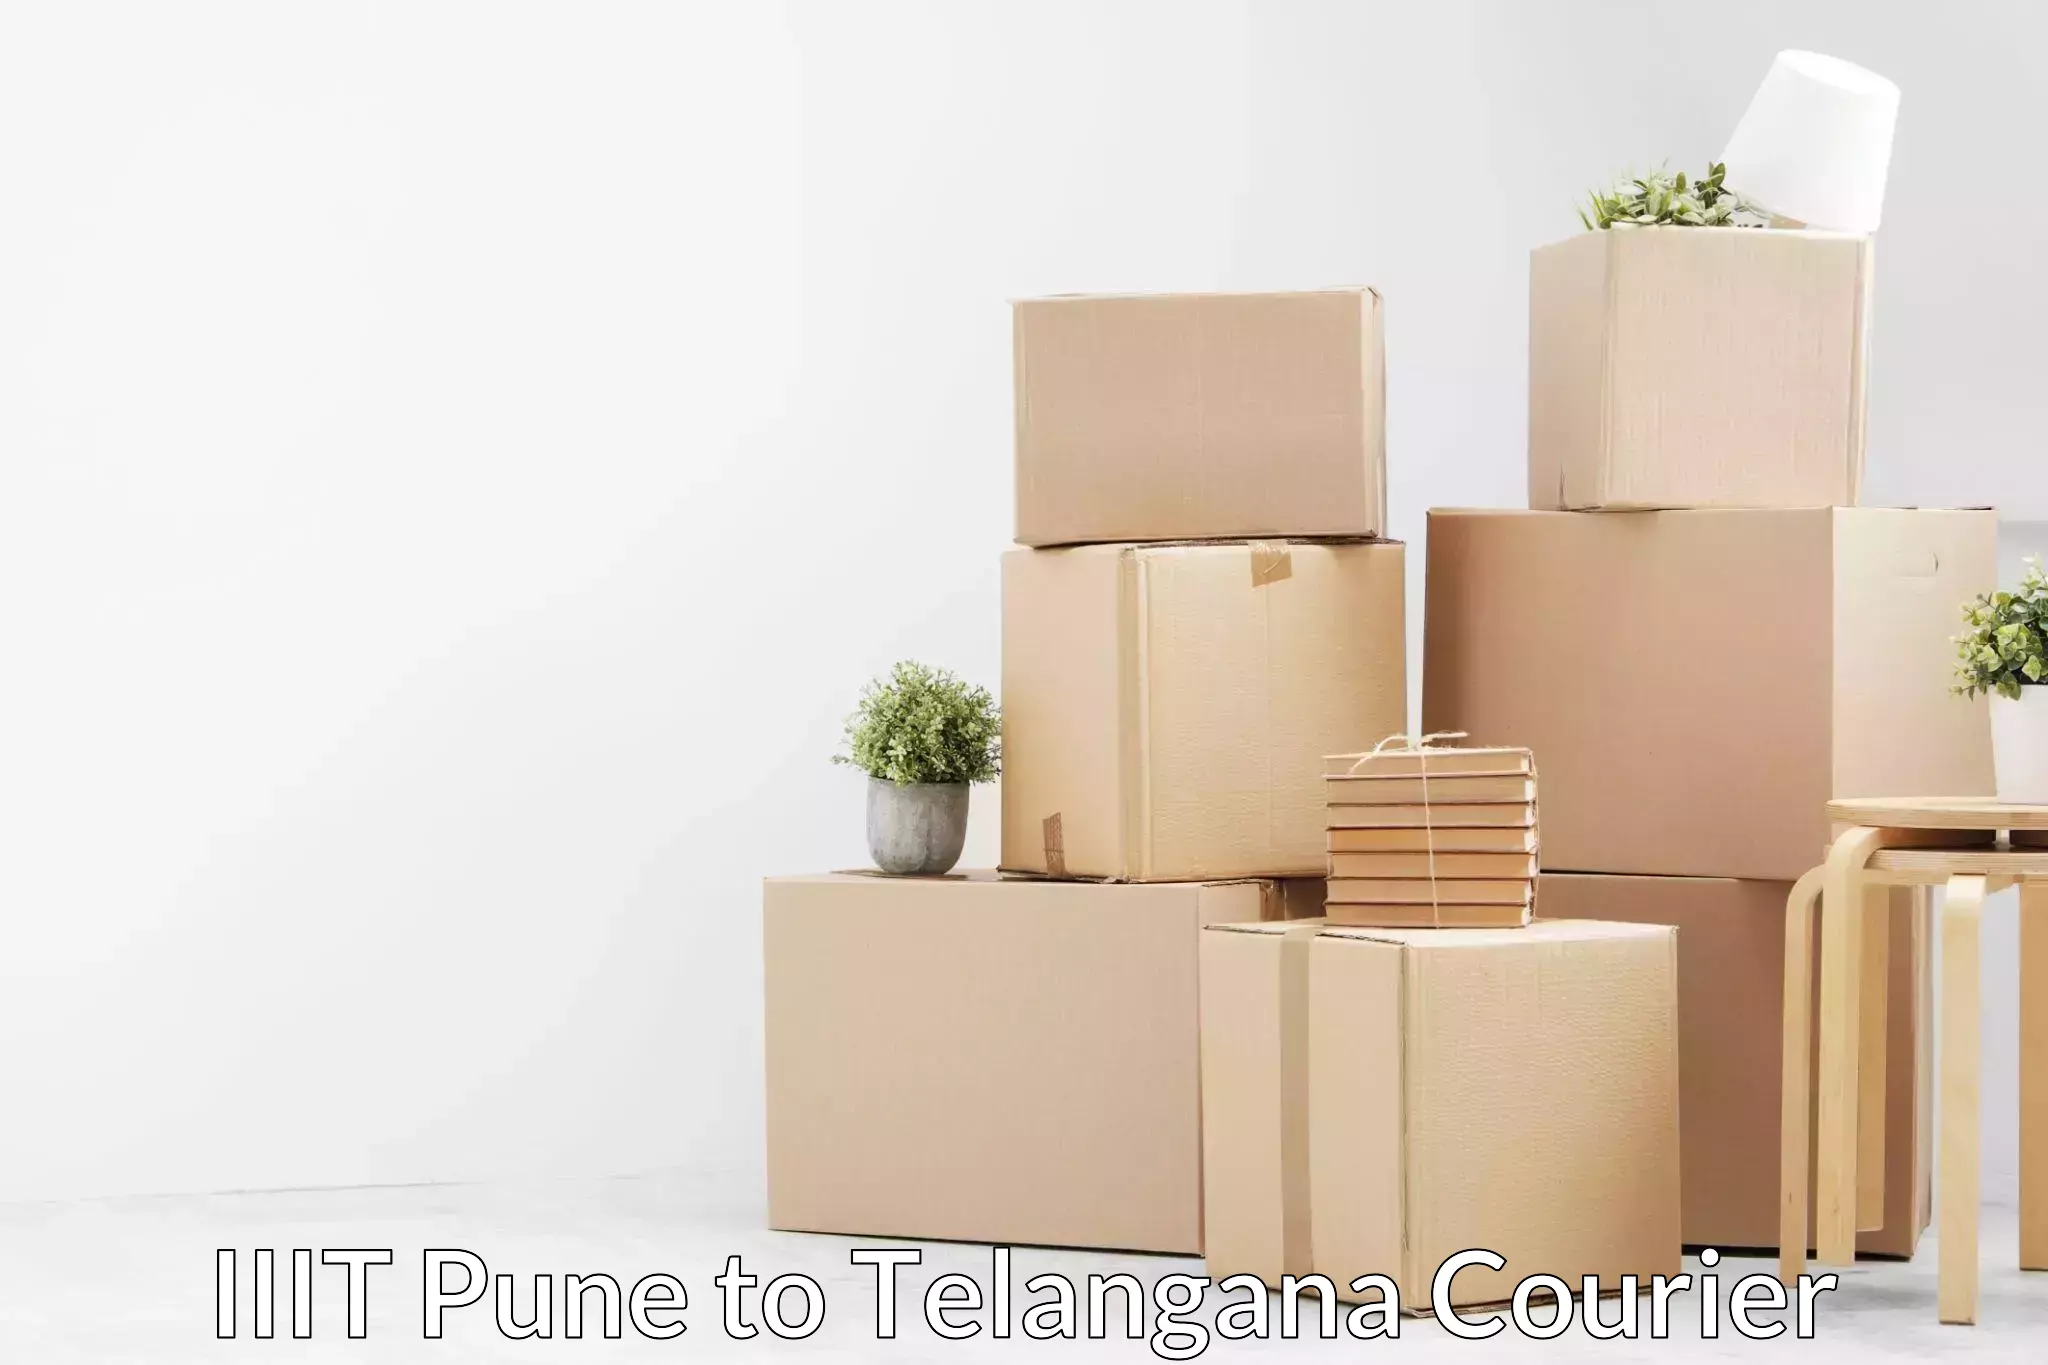 Professional relocation services in IIIT Pune to Yellareddy